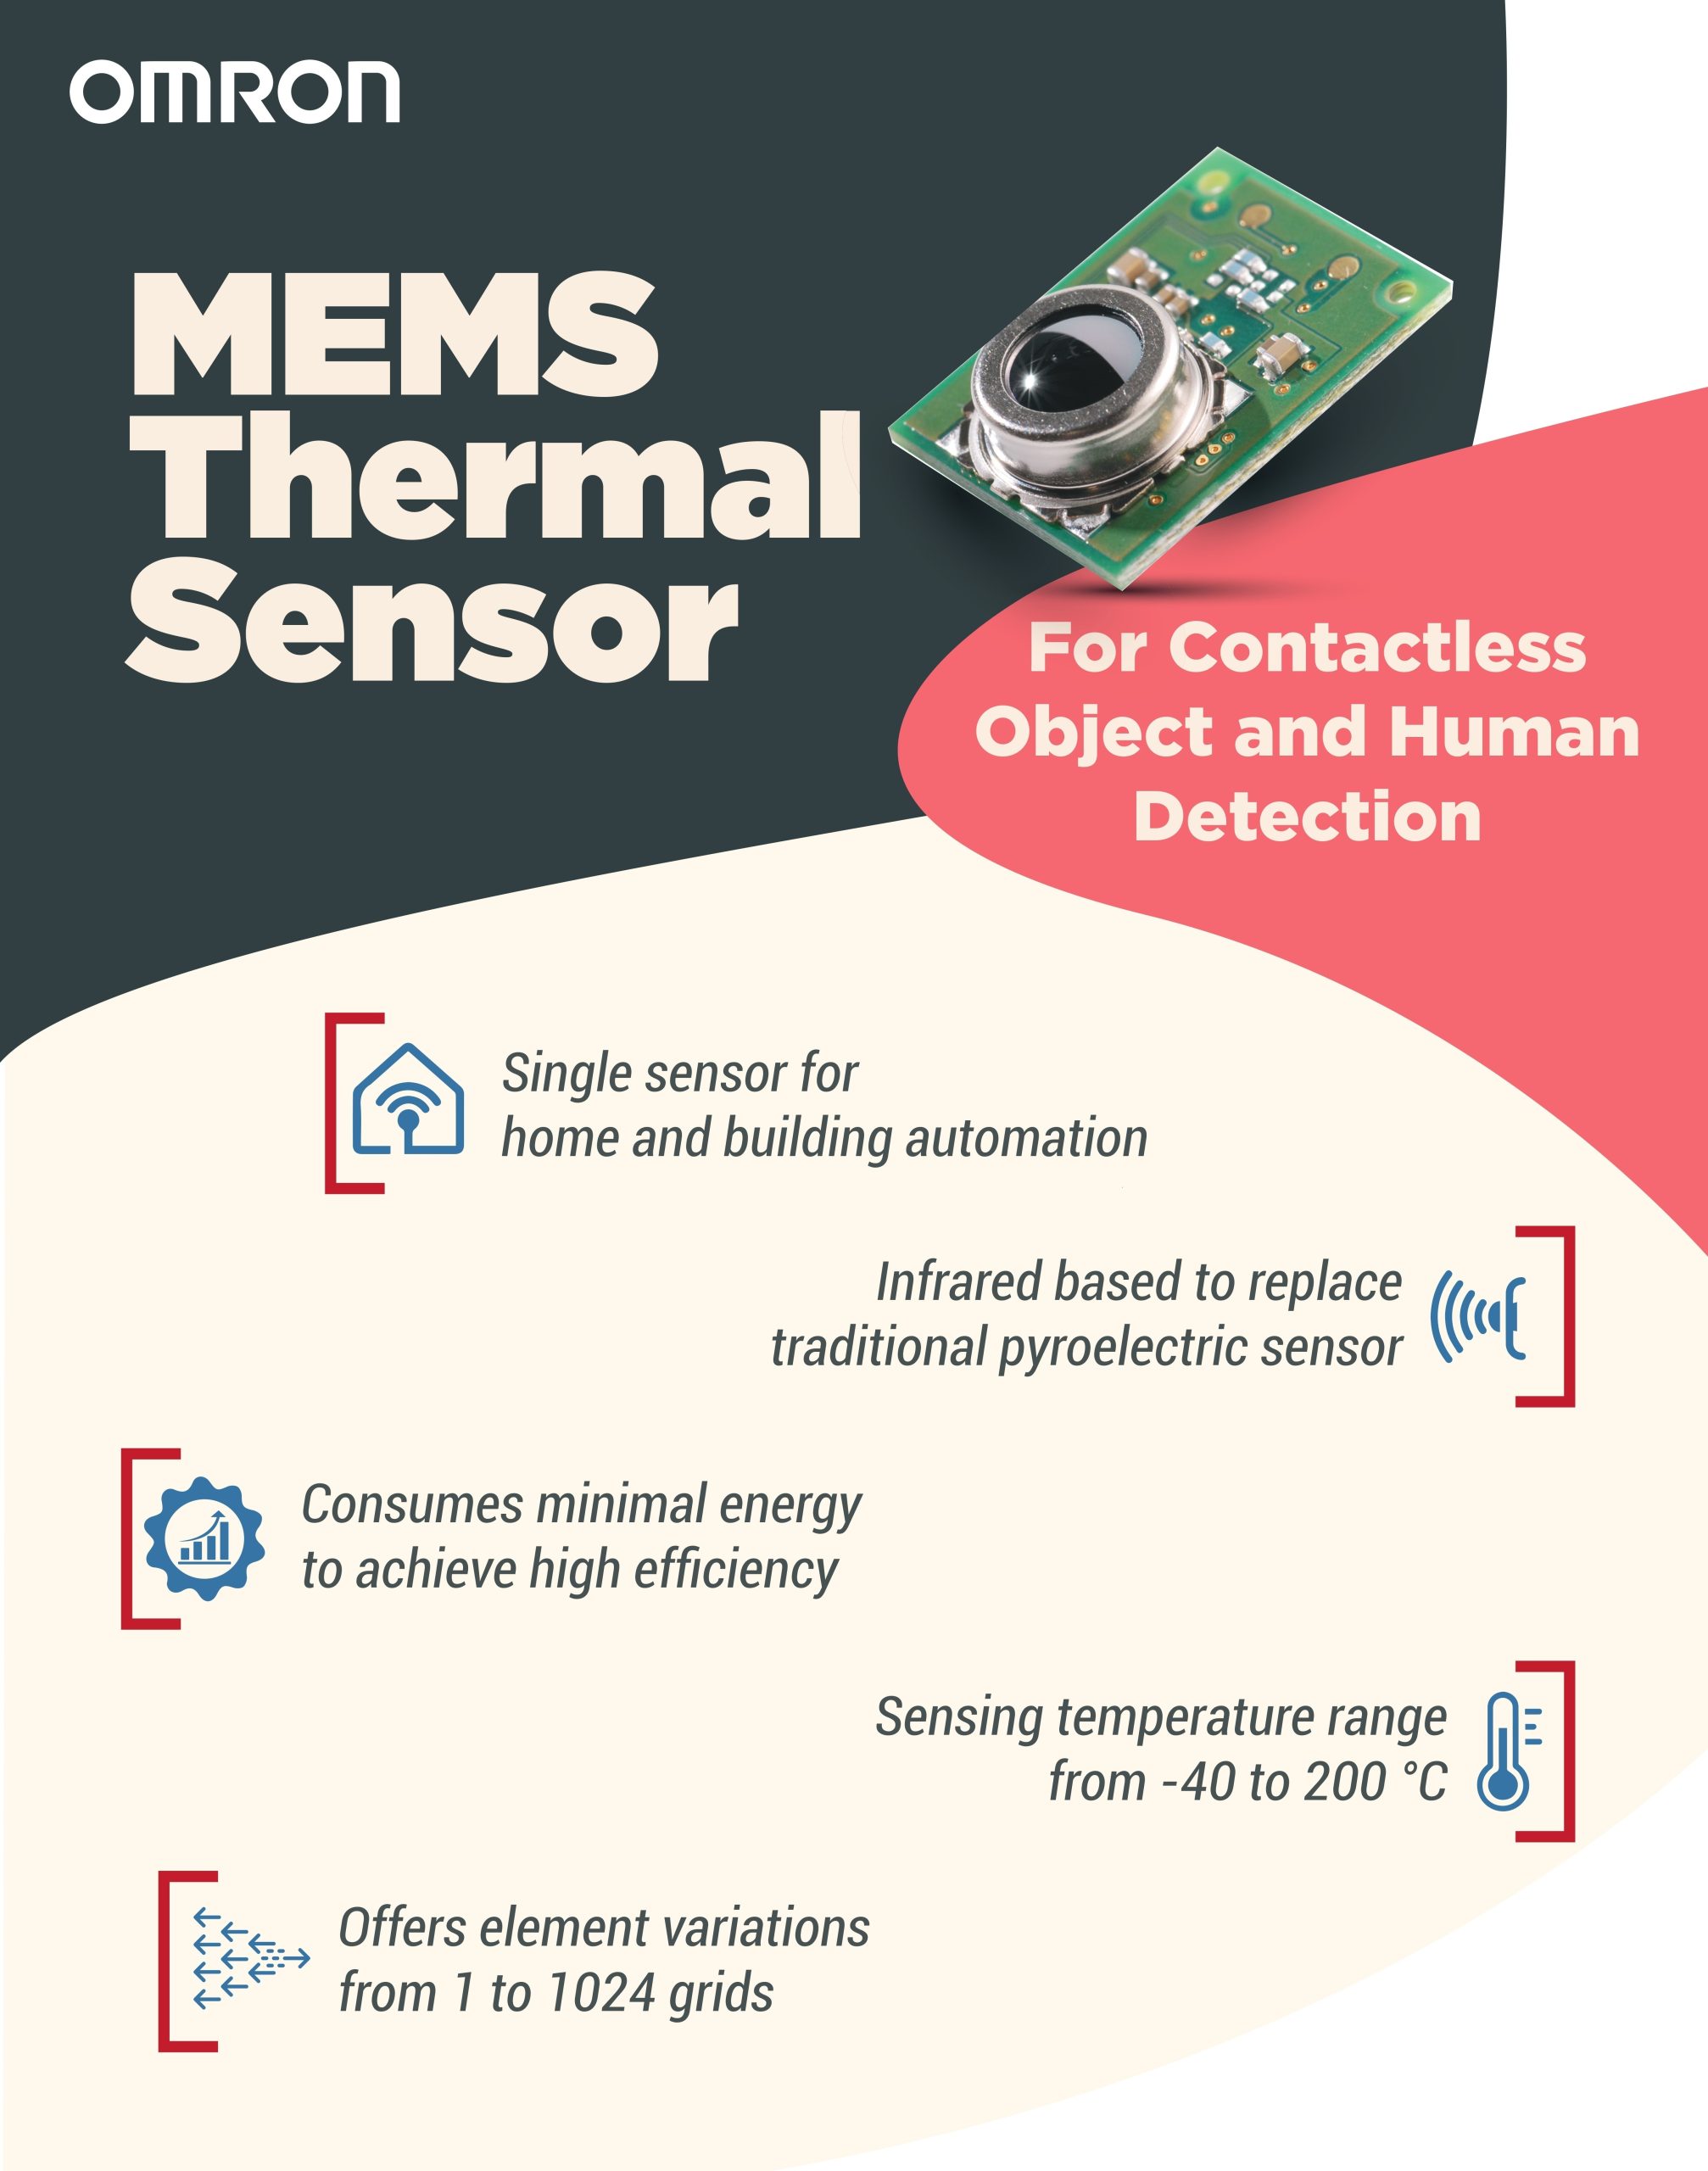 What are the capabilities of a temperature sensor?